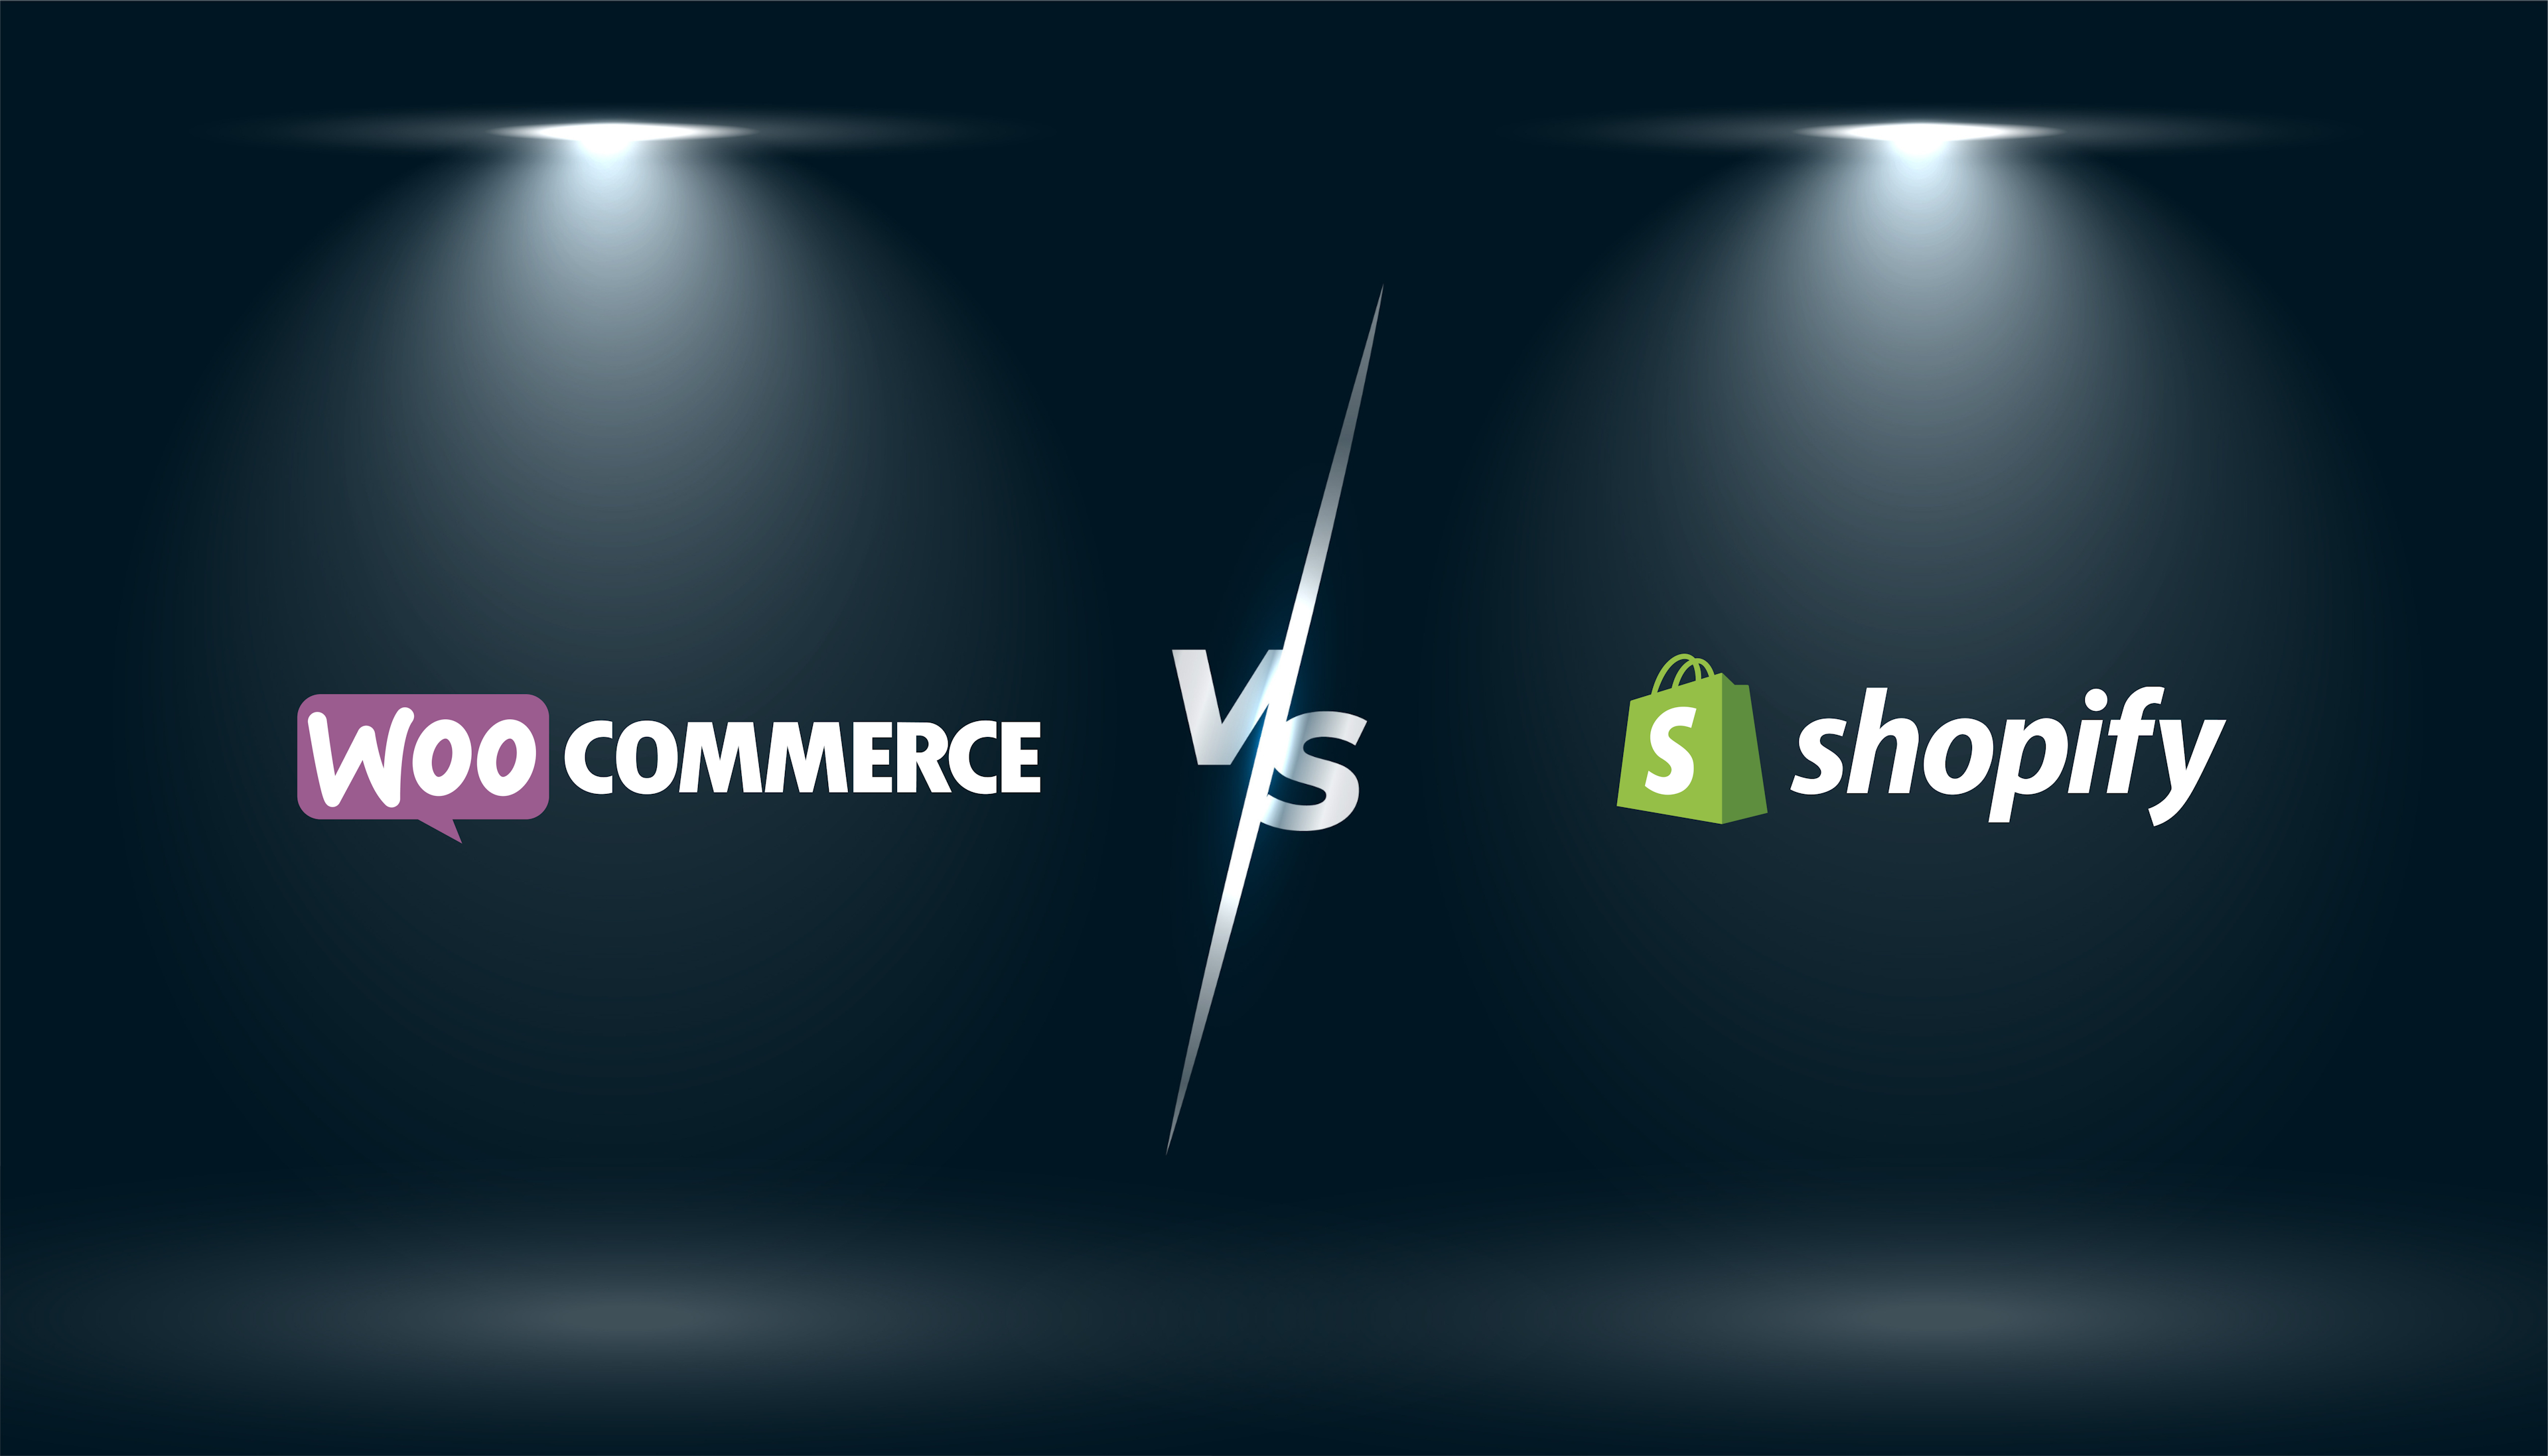 image that shows the comparison of the WooCommerce logo on the left side and the Shopify logo on the right side with a VS in the middle